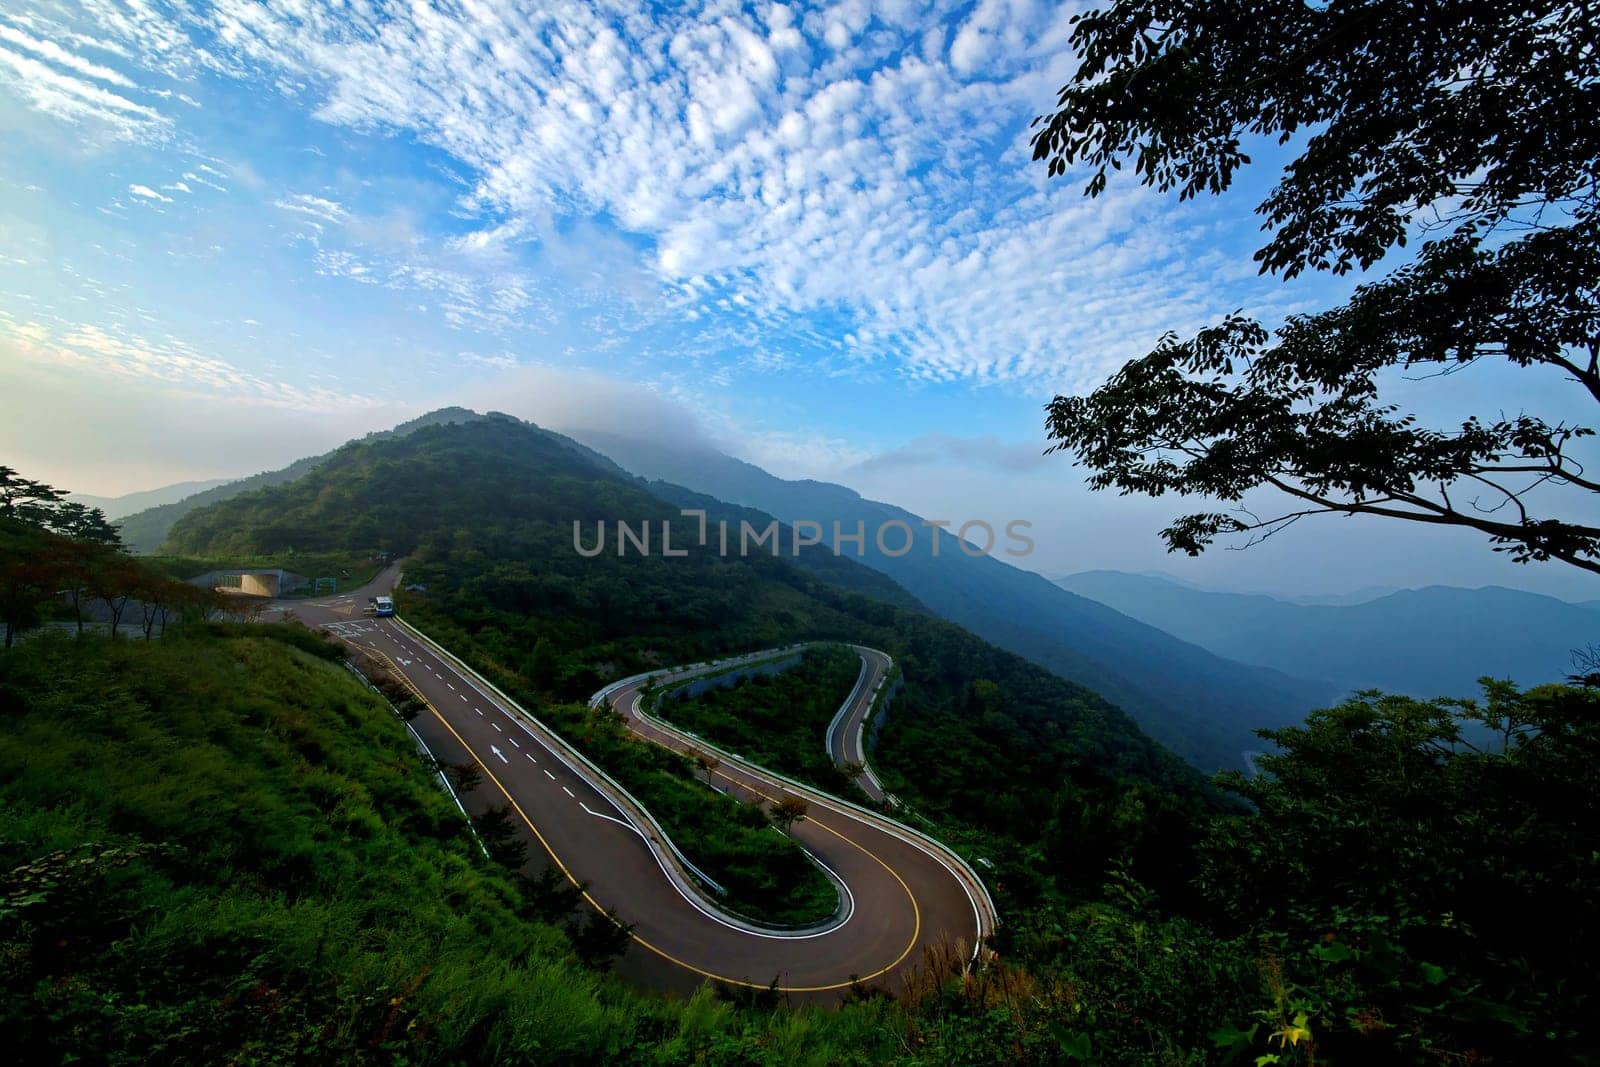 sky,tree,slope,cloud,mountain,grass,plant,highland,highway,infrastructure,landscape,morning,nature,road